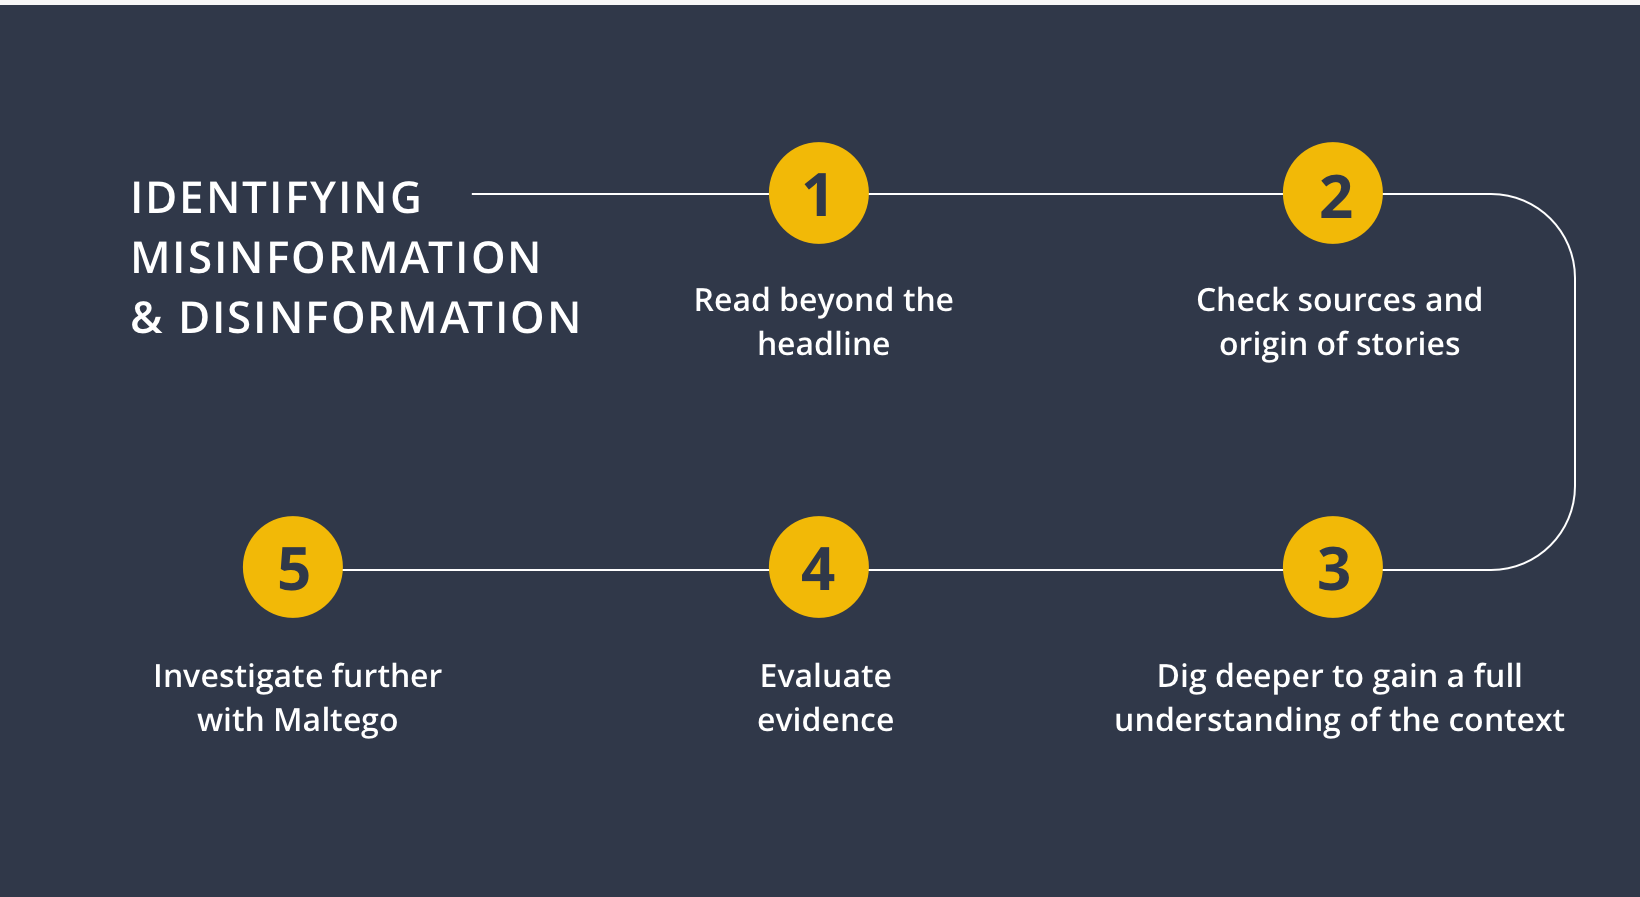 Steps to identify misinfomation and disinformation with Maltego